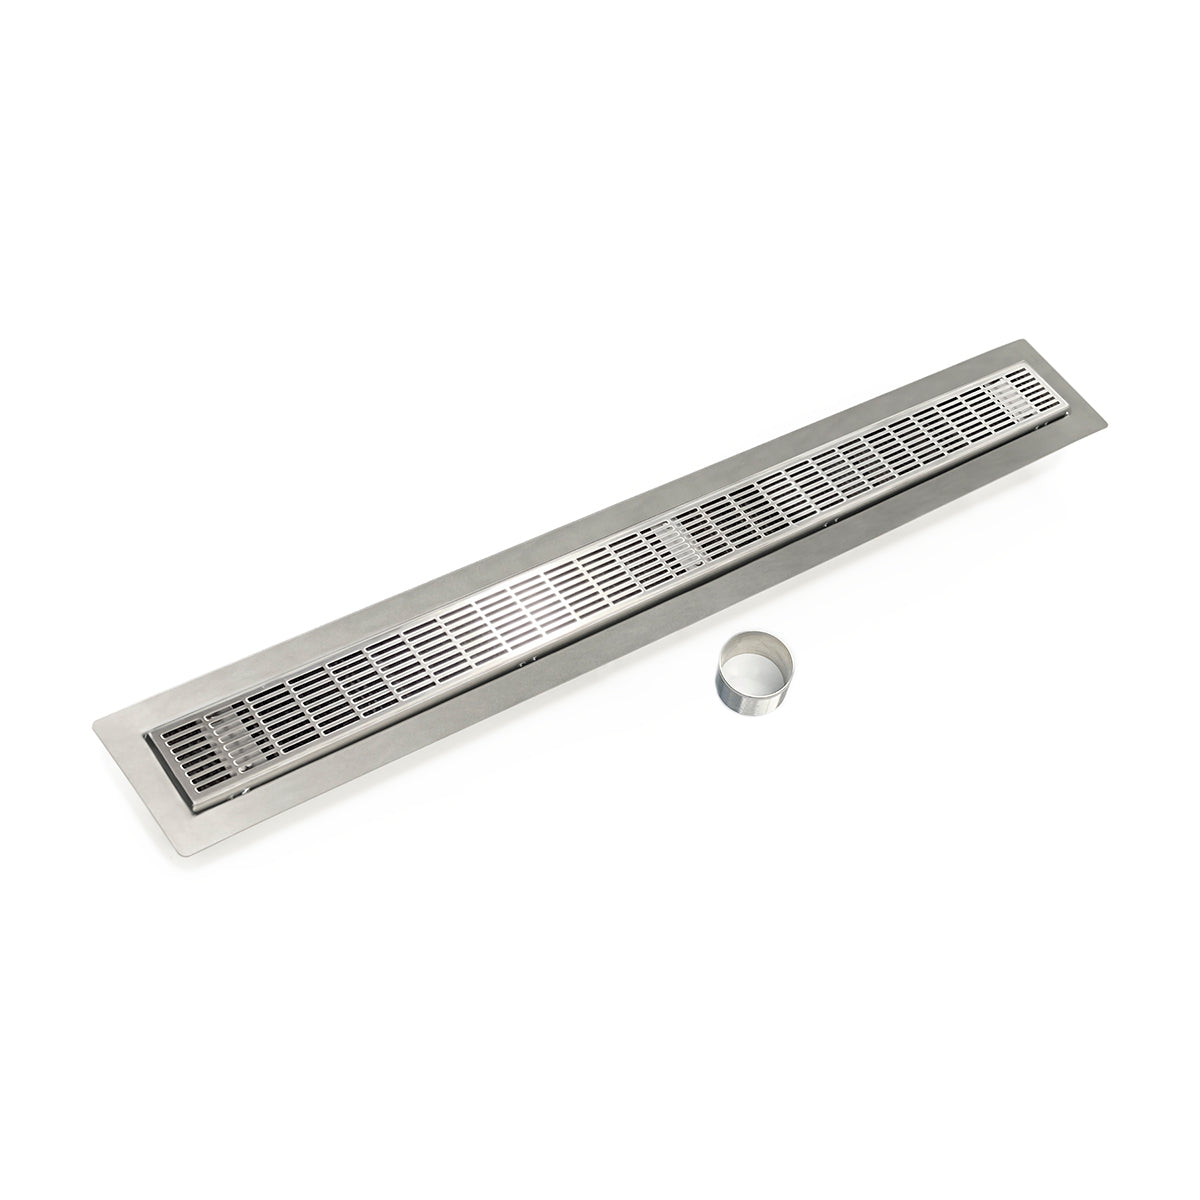 Infinity Drain 60" FCB Series Double Waterproofing Linear Drain Kit with 2 1/2" Perforated Slotted Grate